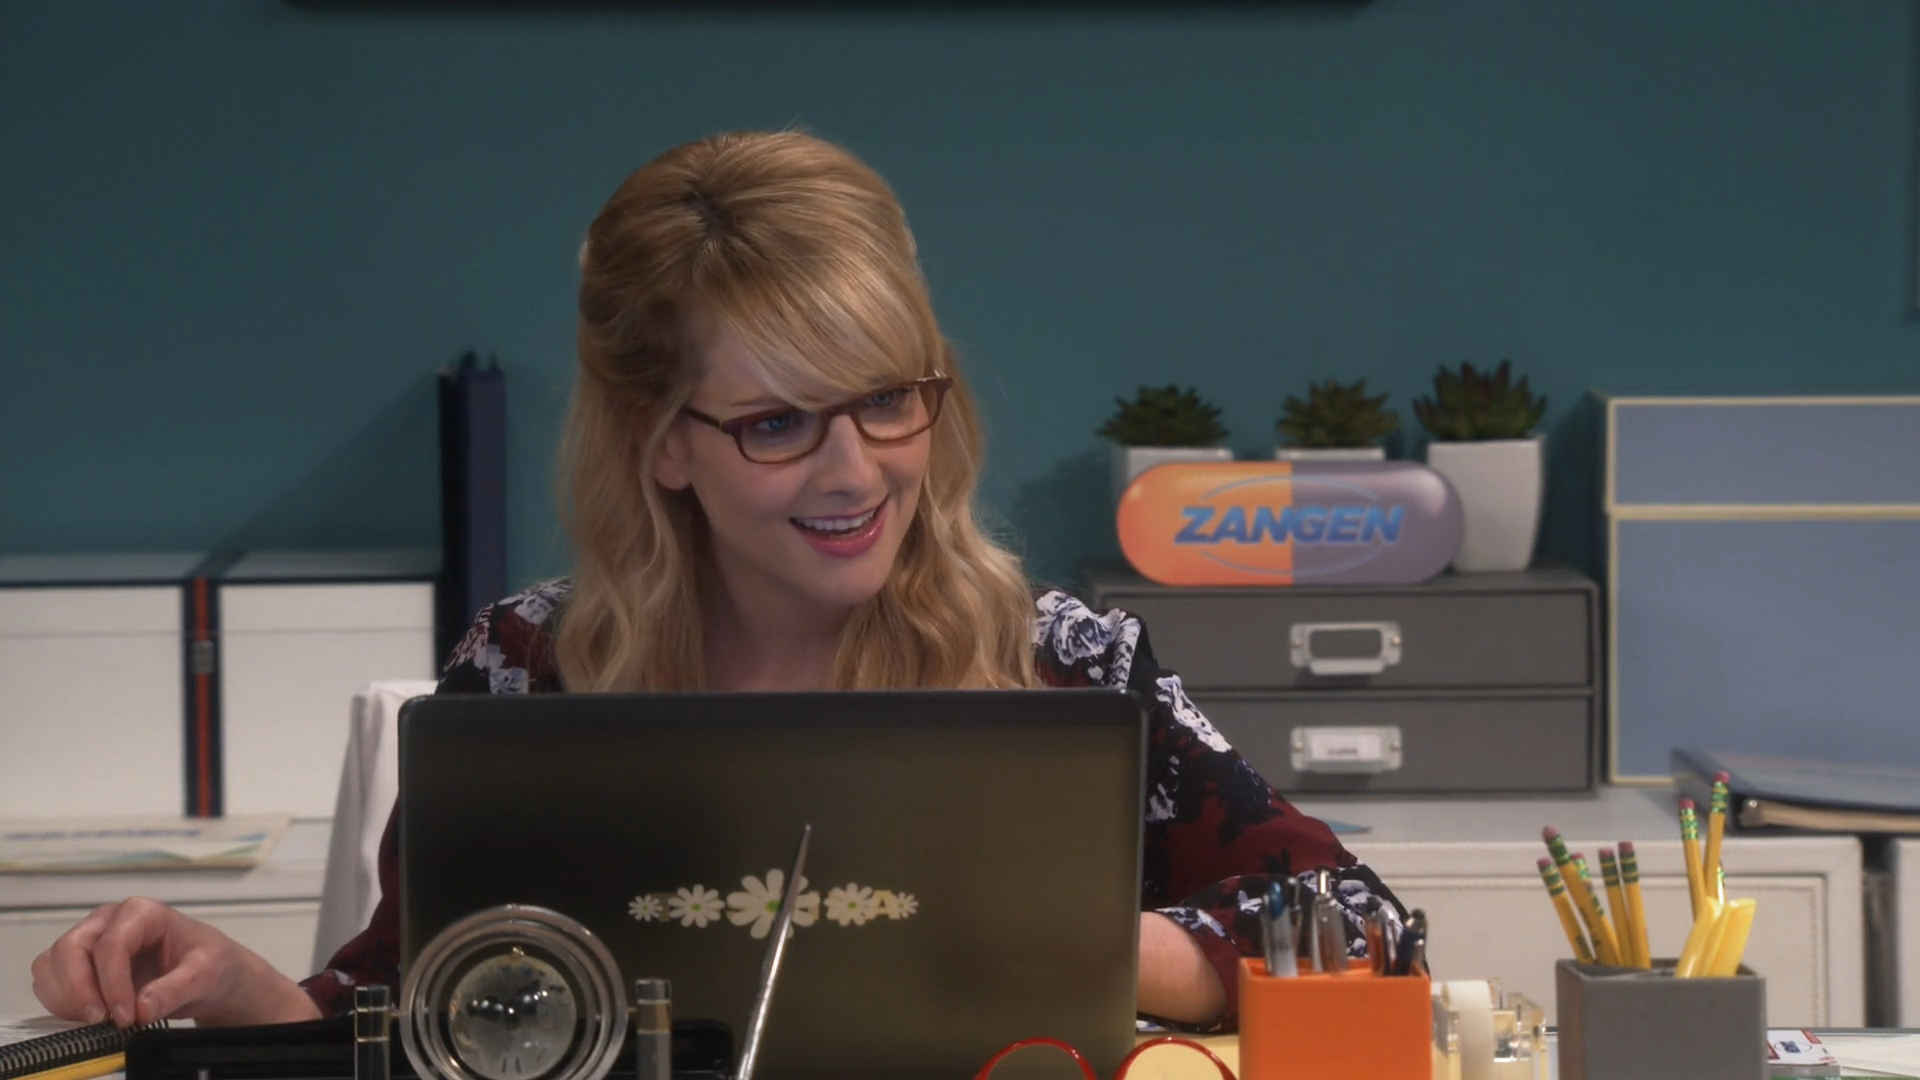 The IQ Of Bernadette in The Big Bang Theory